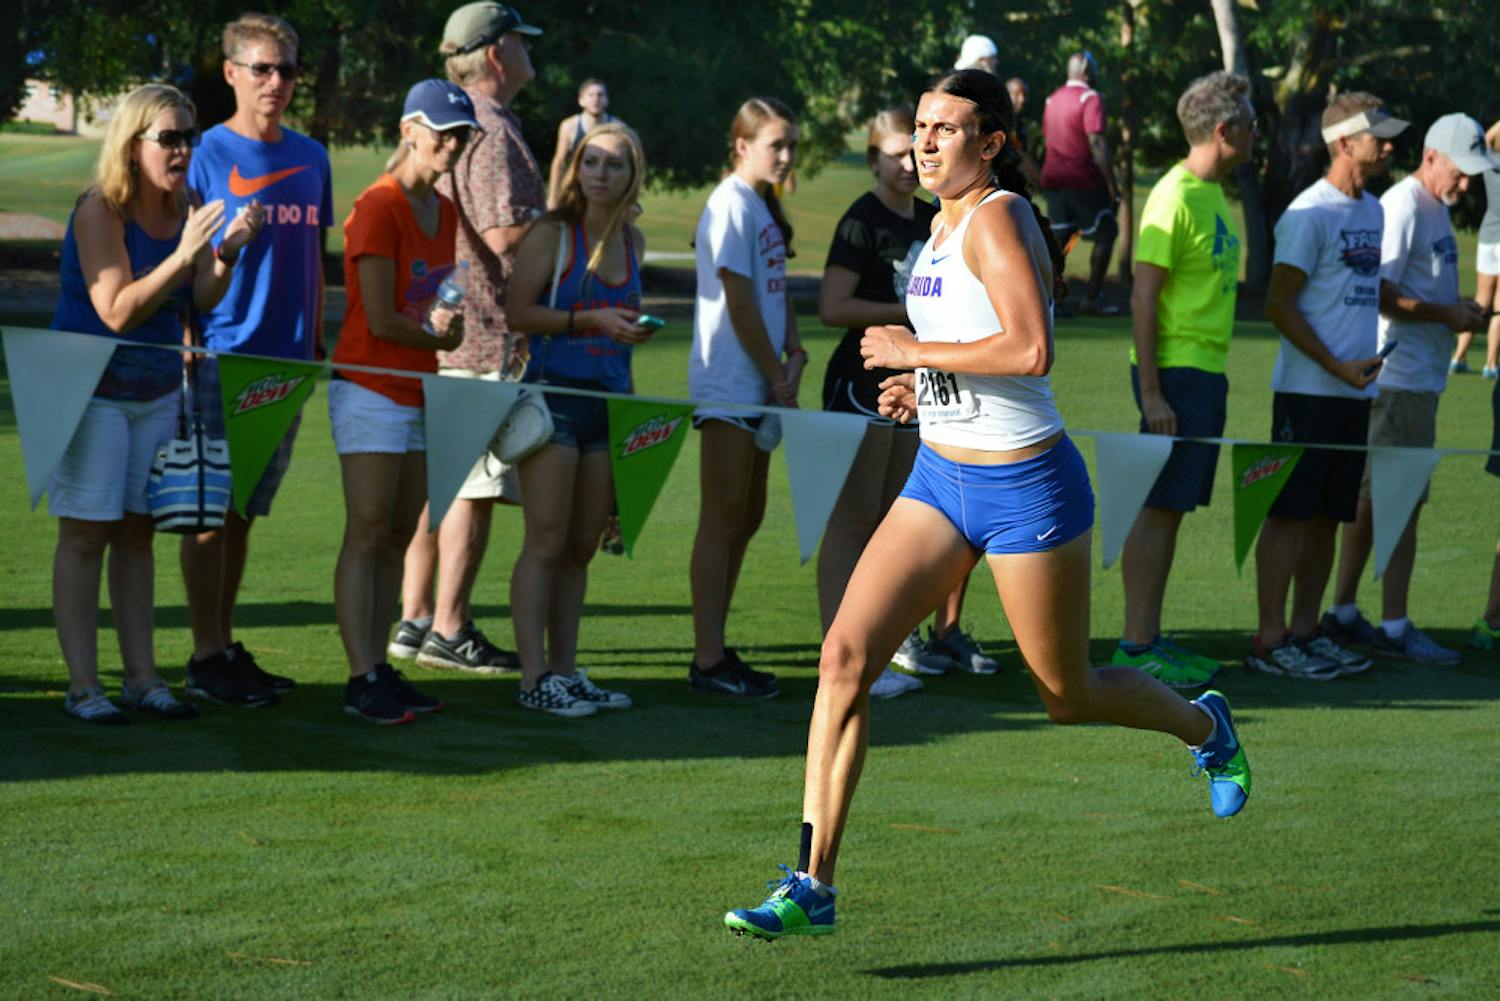 Jessica Pascoe became the first UF runner to finish first in every meet she competed in in a season.